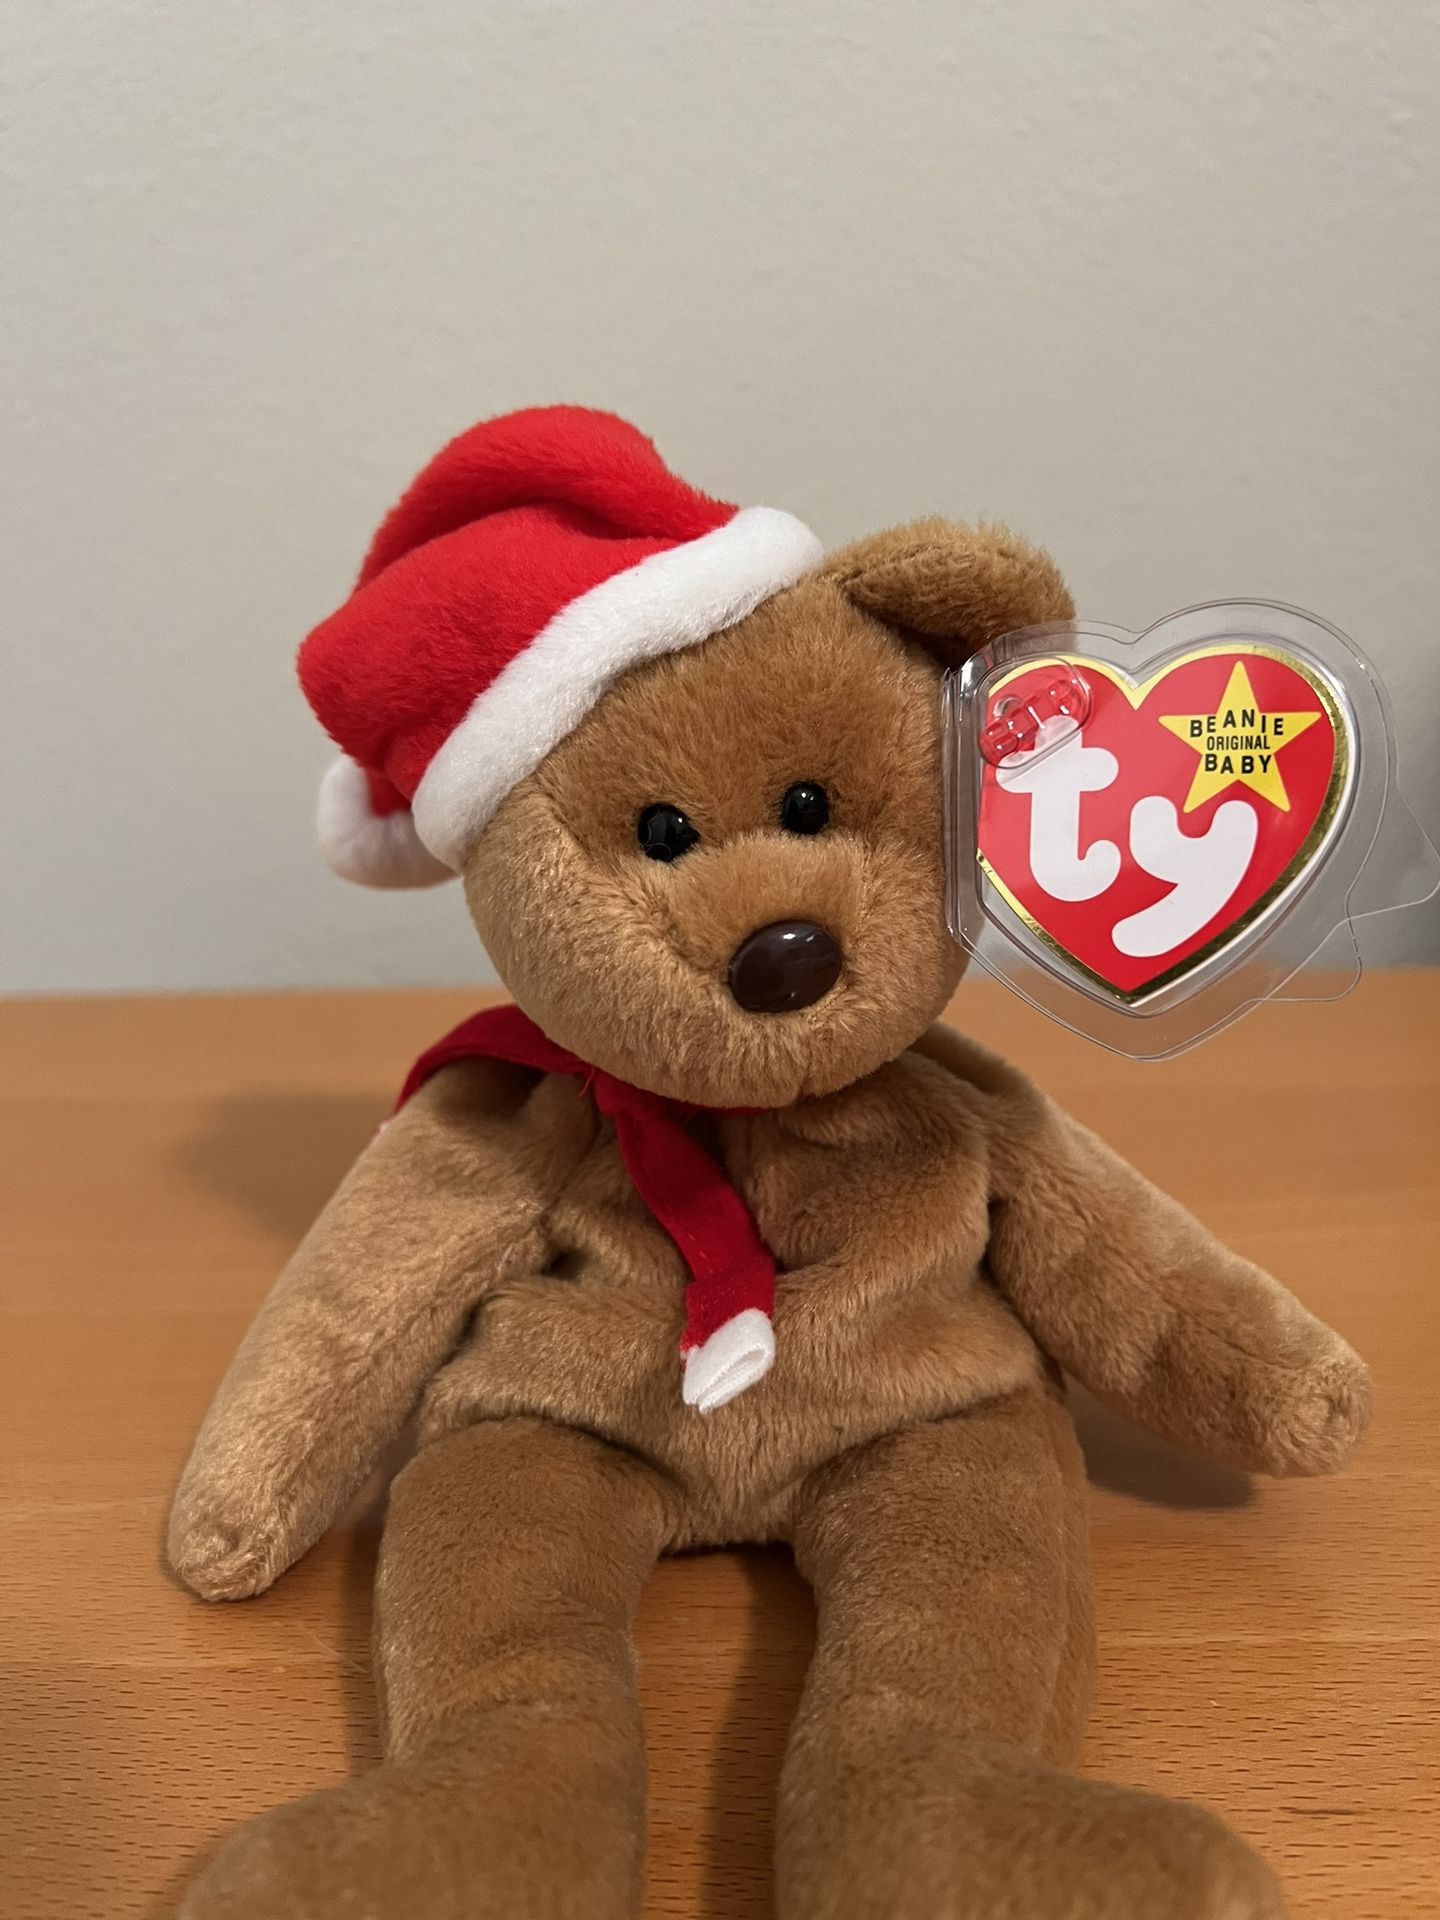  Ty Original Beanie Babies 1997. . New Condition.  He is wearing a red scarf with white fringe and a red hat with white